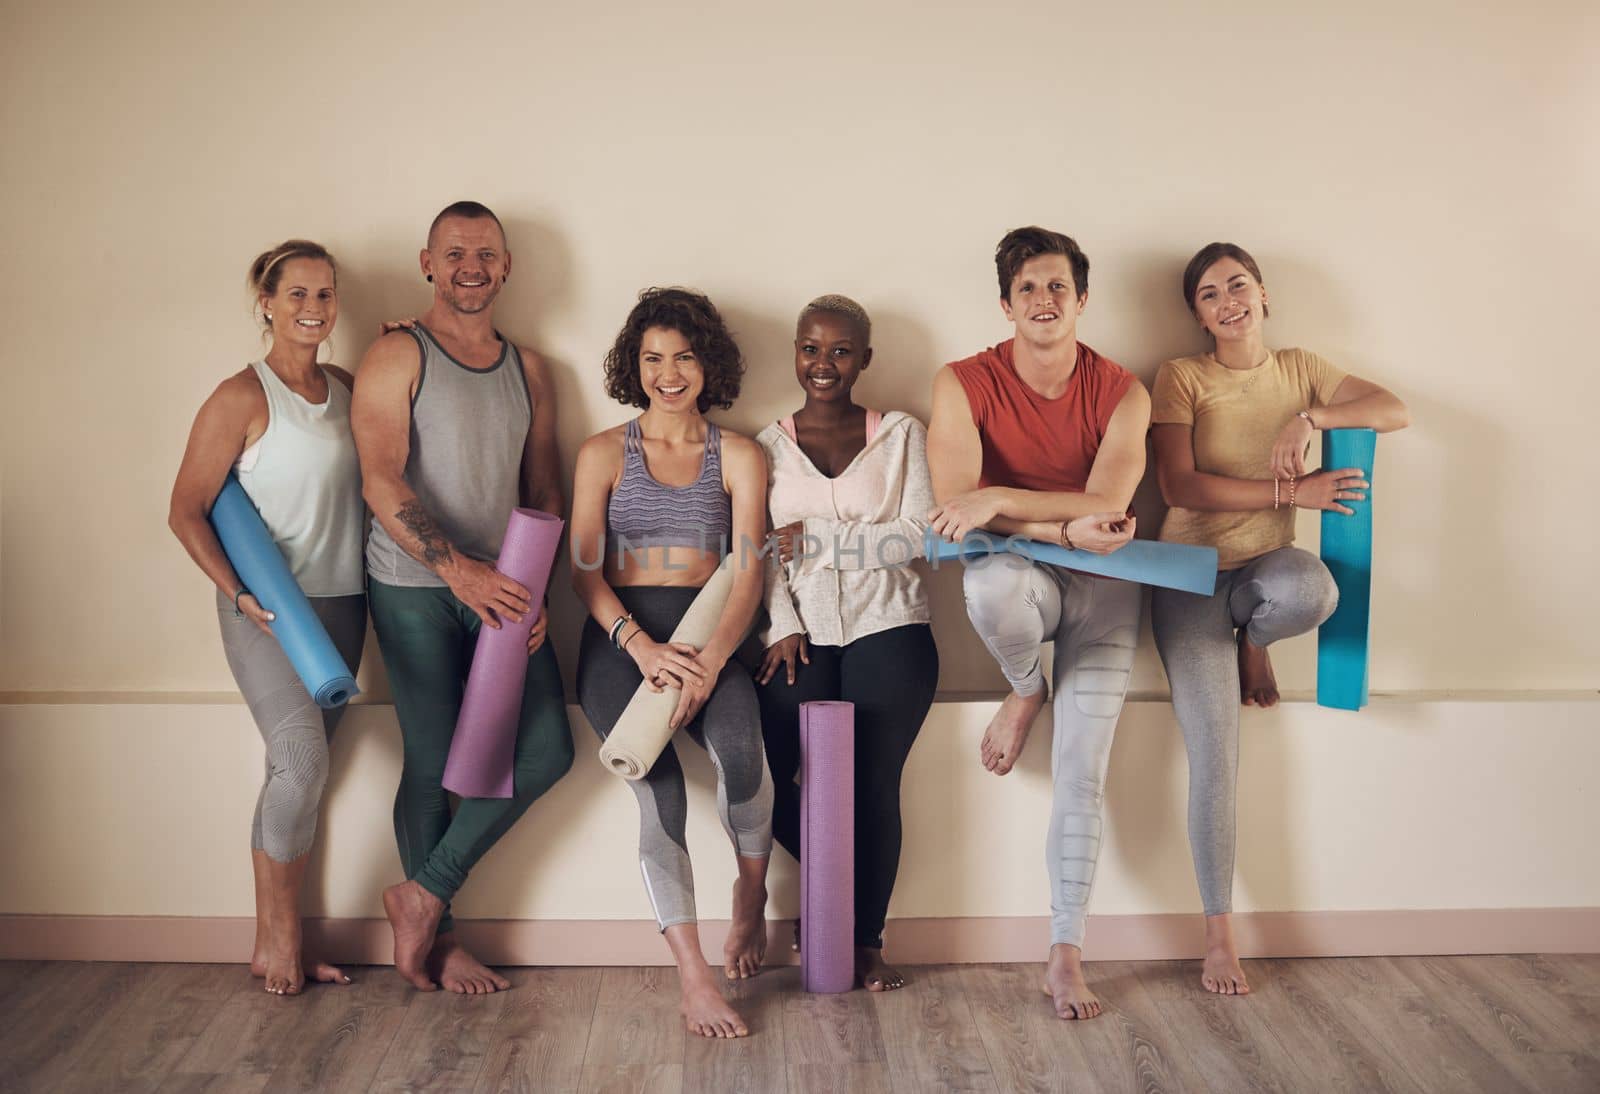 What a great yoga class. Full length portrait of a diverse group of yogis sitting together and bonding after an indoor yoga session